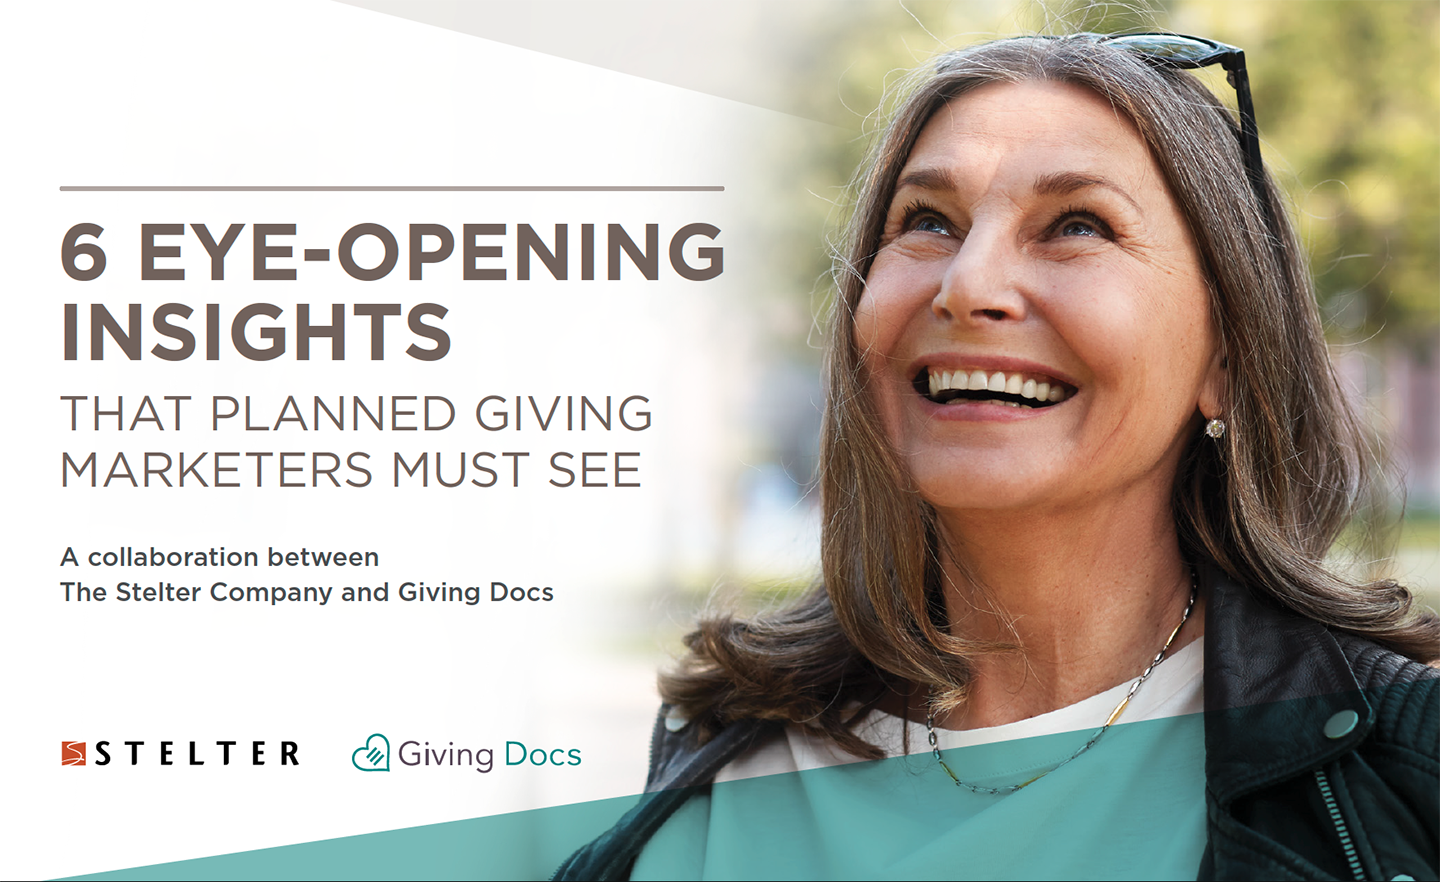 6 Eye-Opening Insights That Planned Giving Marketers Must See